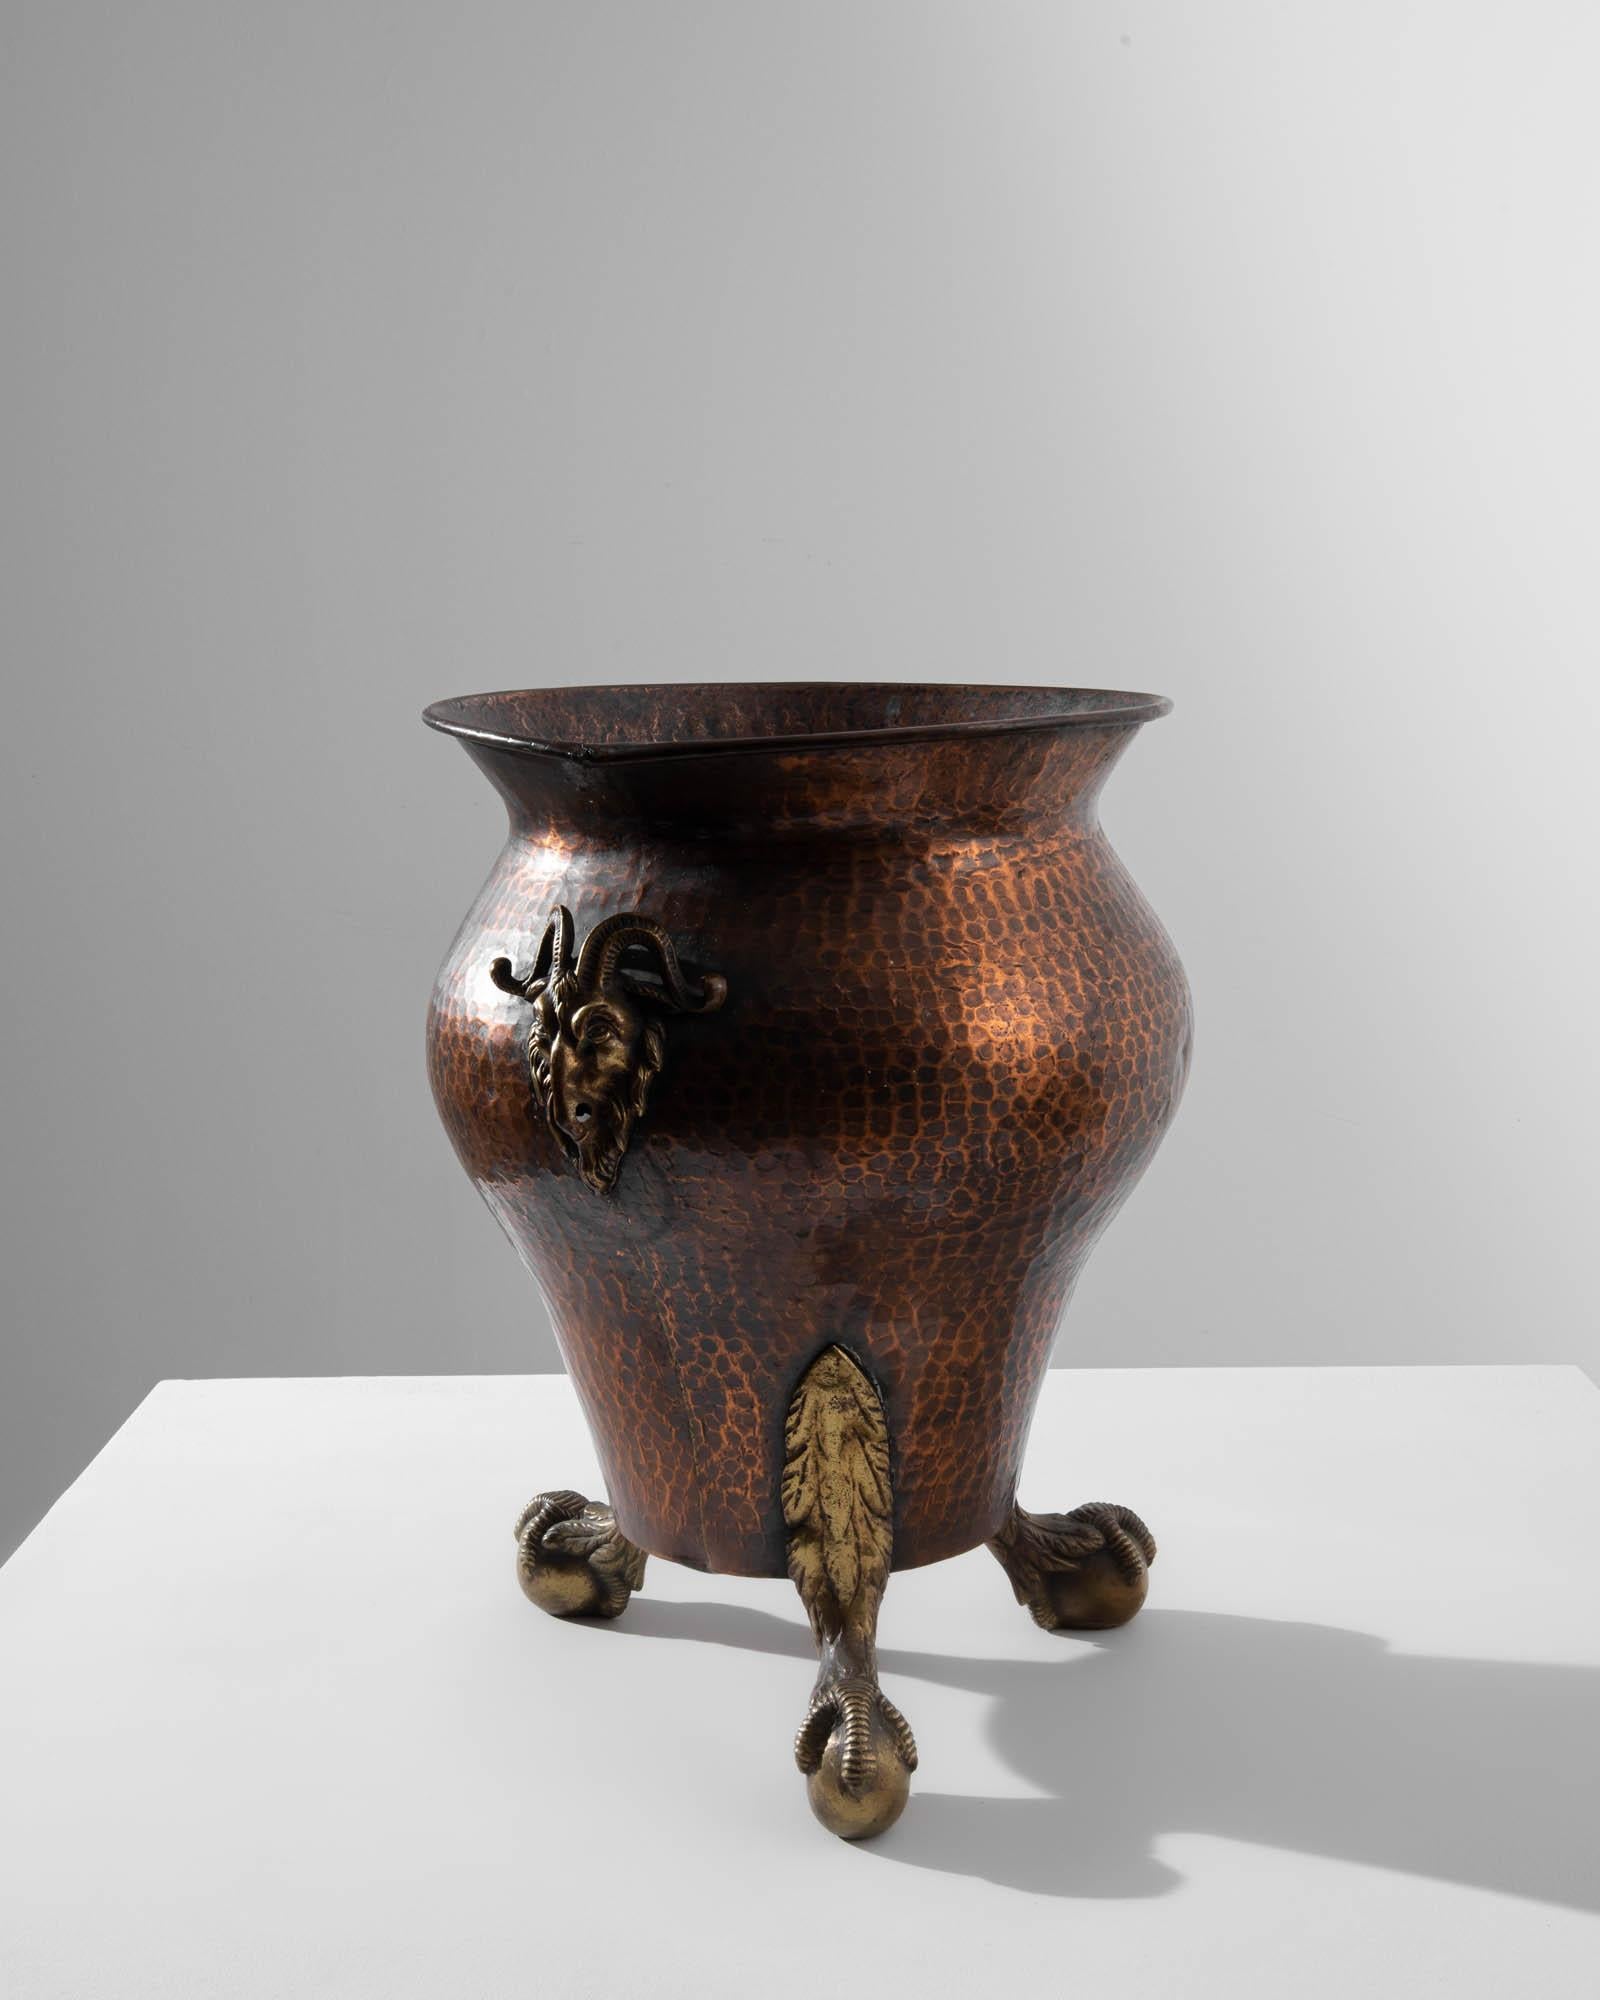 This antique copper vase offers a unique and intriguing accent. Made in France in the 1800s, the urn of beaten copper rests atop a trio of taloned brass feet; an intricately cast goat’s head in the center of the vase provides a compelling focal